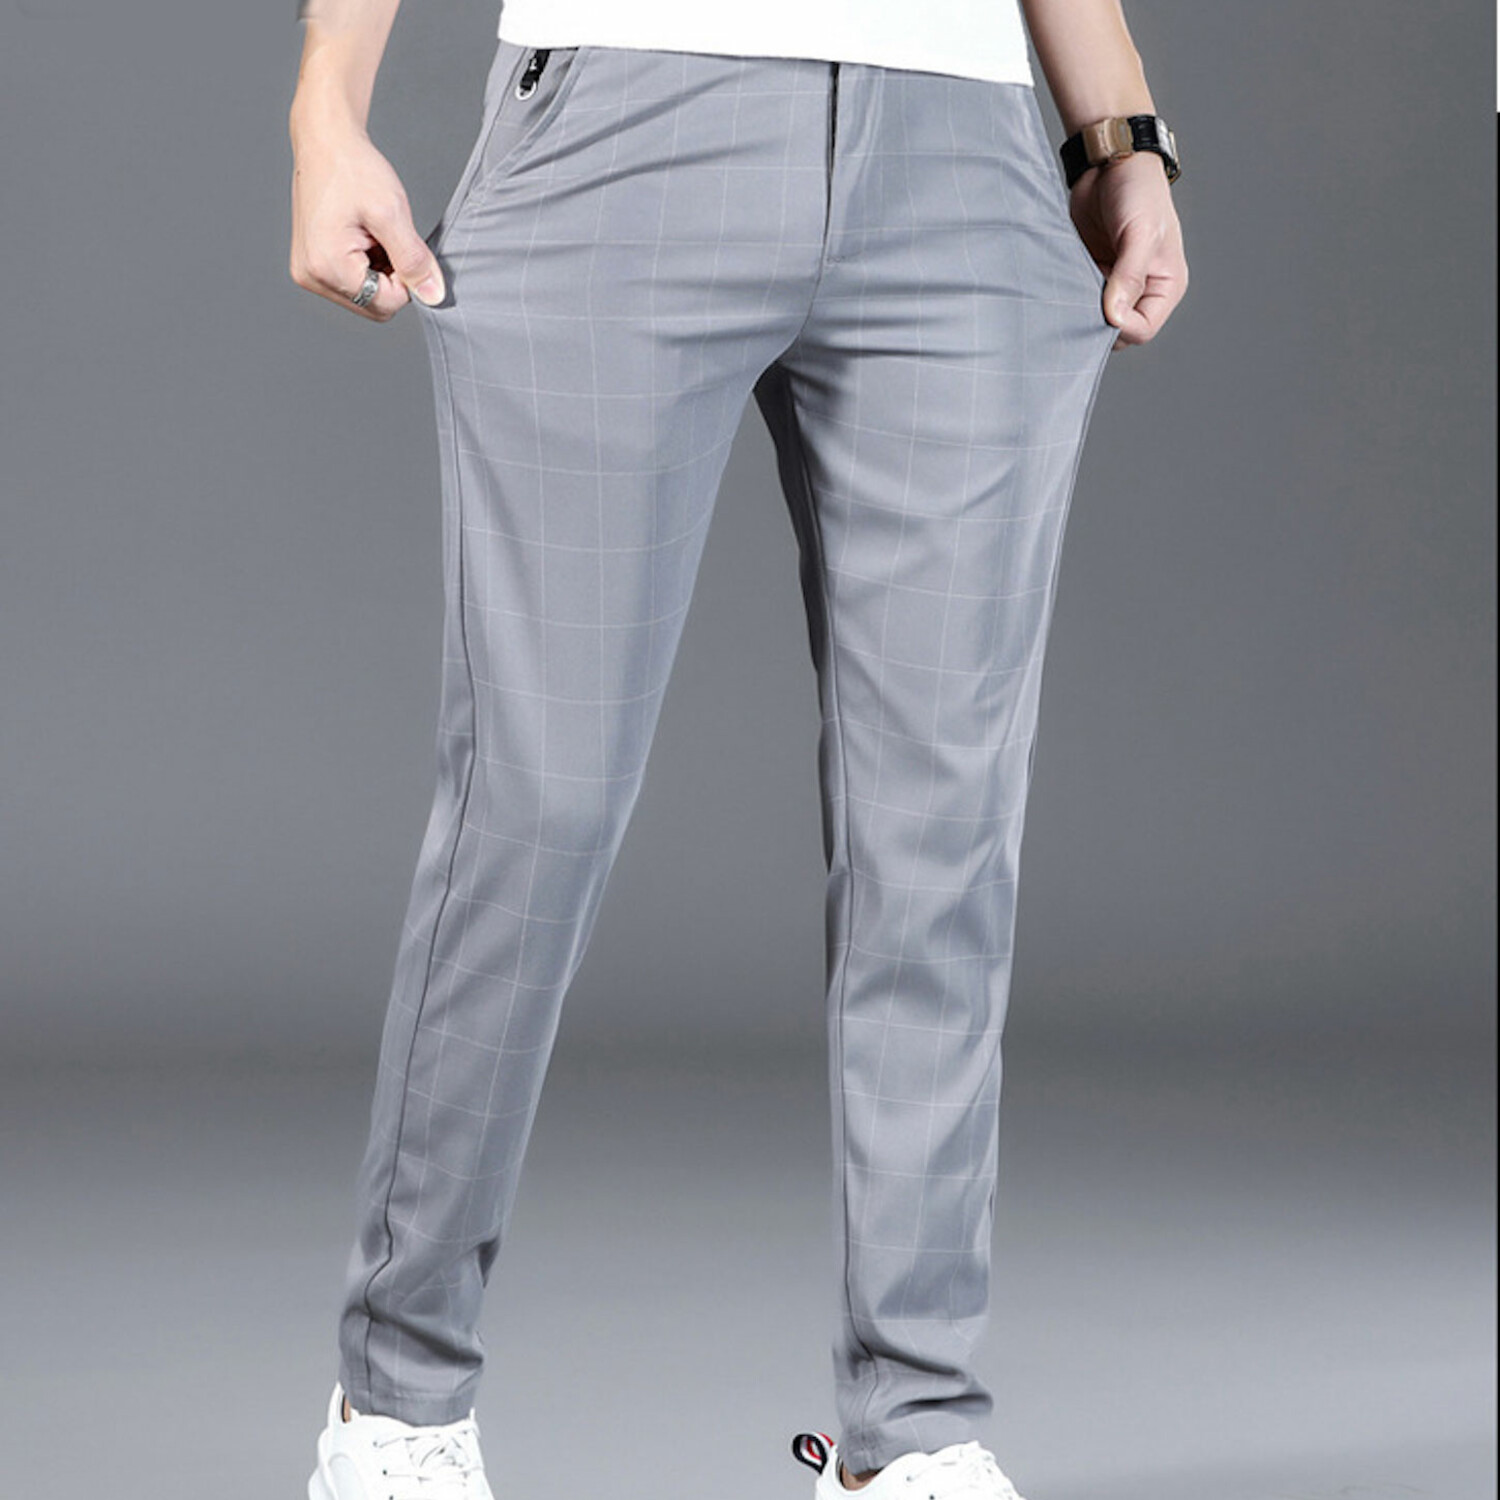 Wide Grid Print Slim Fit Pants // Light Gray (34) - Amedeo Exclusive ...